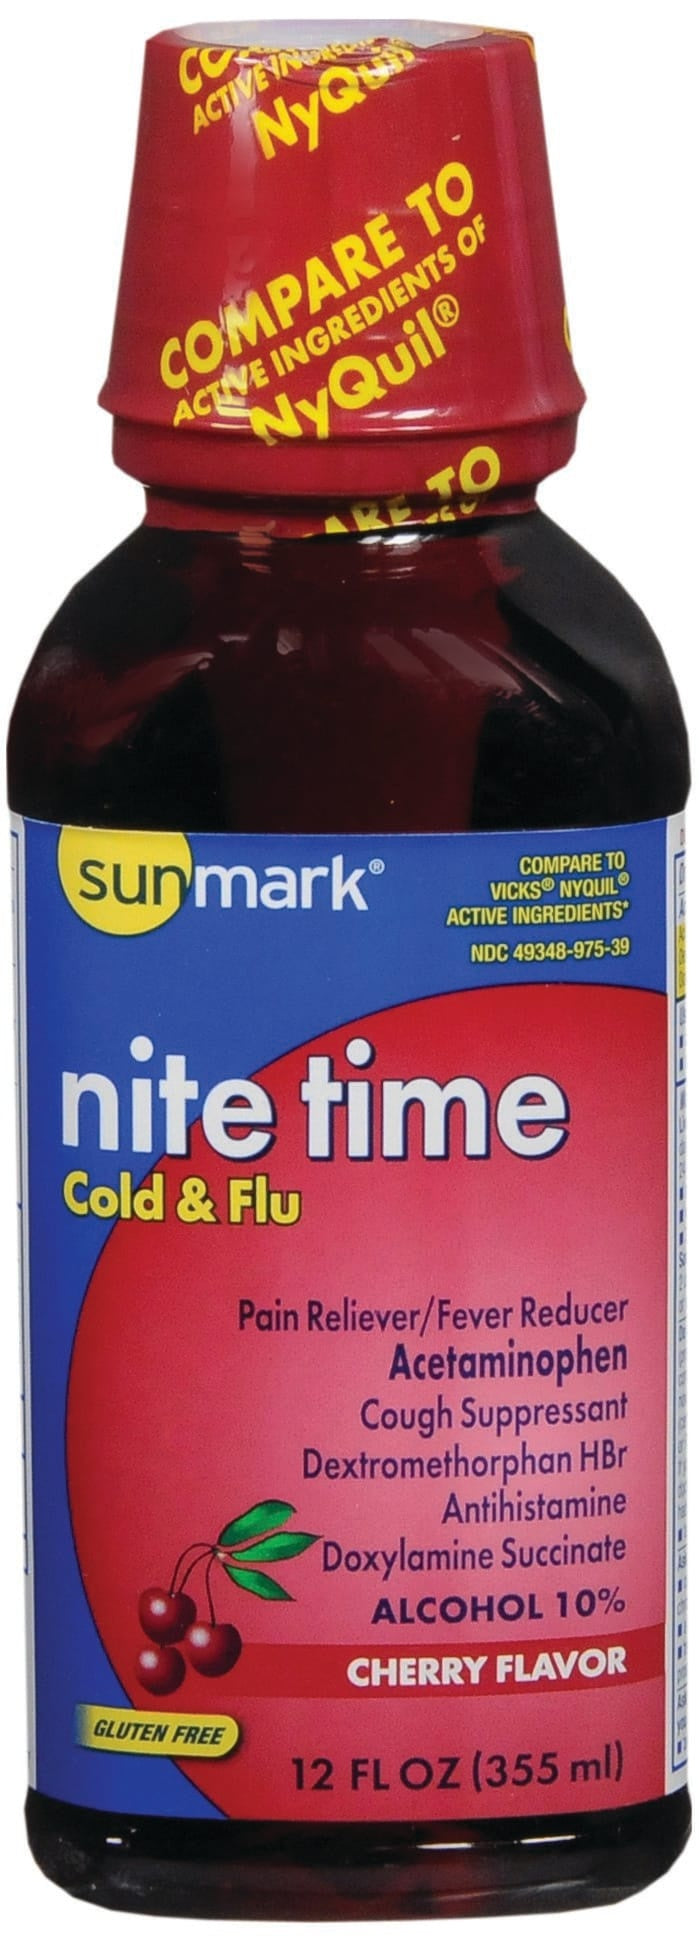 Nite Time - Cold & Flu Nighttime Relief - 12 oz - Cherry Flavor